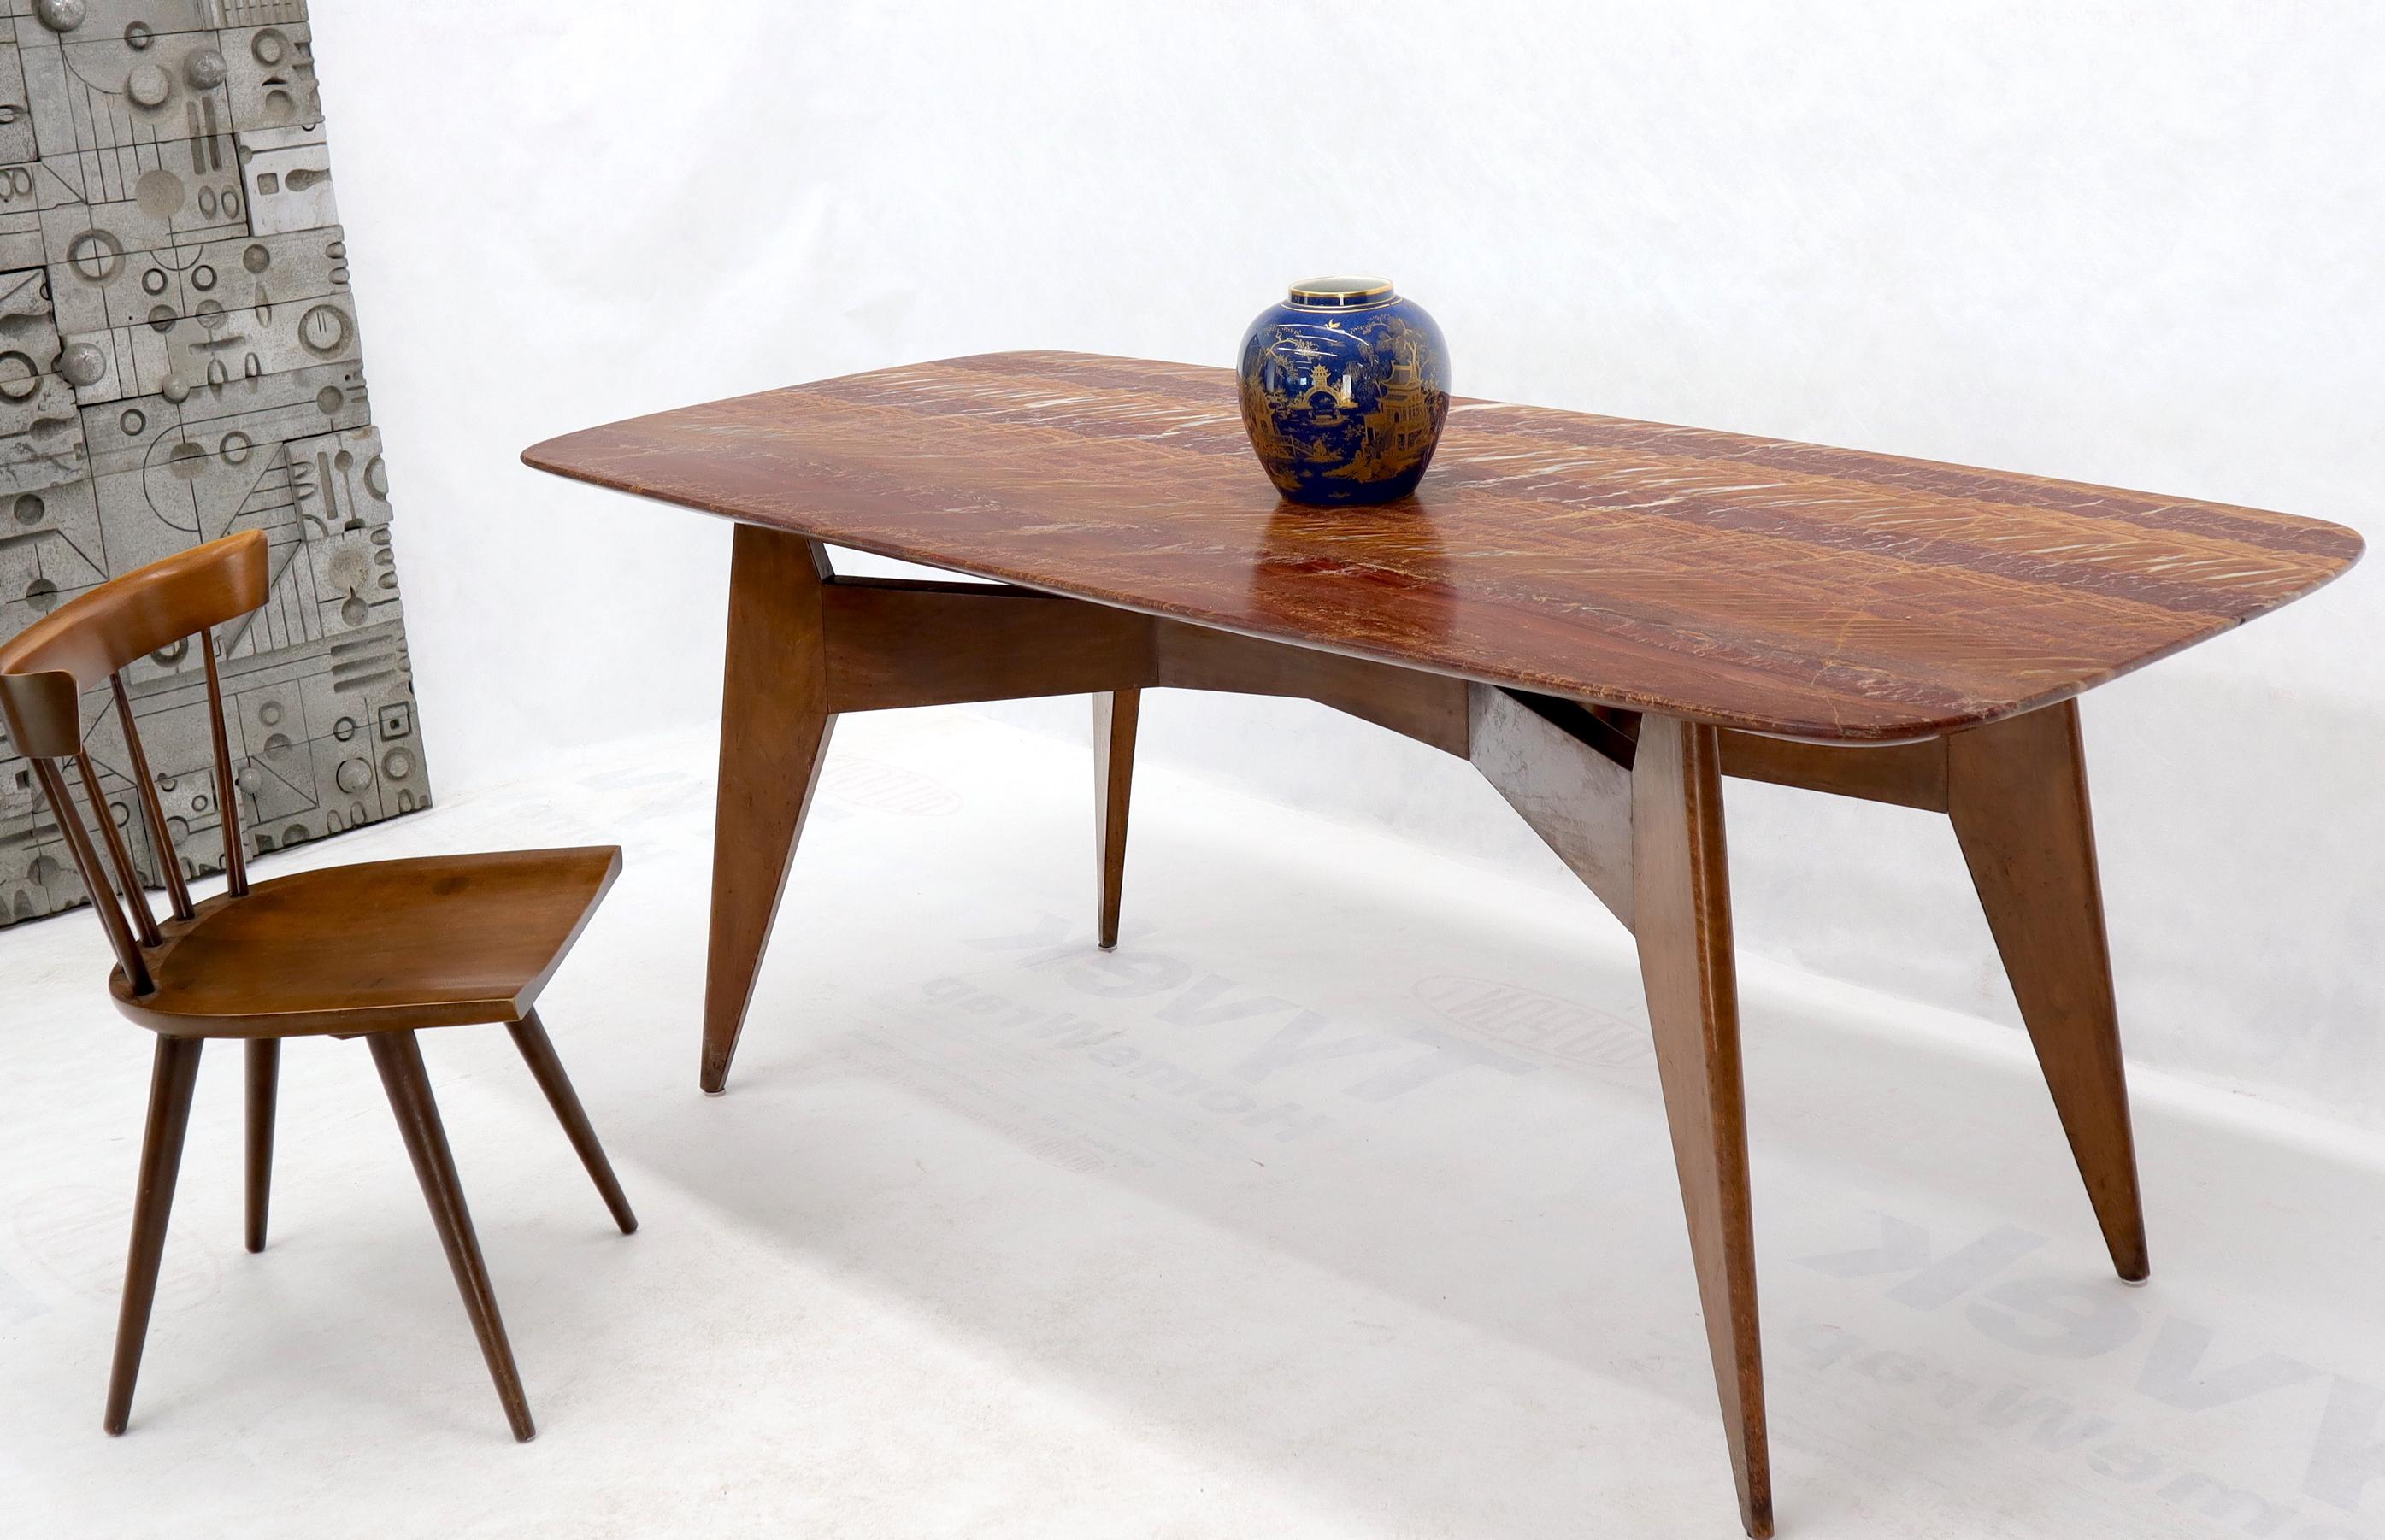 French Mid-Century Modern deco solid walnut compass shape legs base marble top dining or conference table. Attributed to or in style of Jean Prouve.